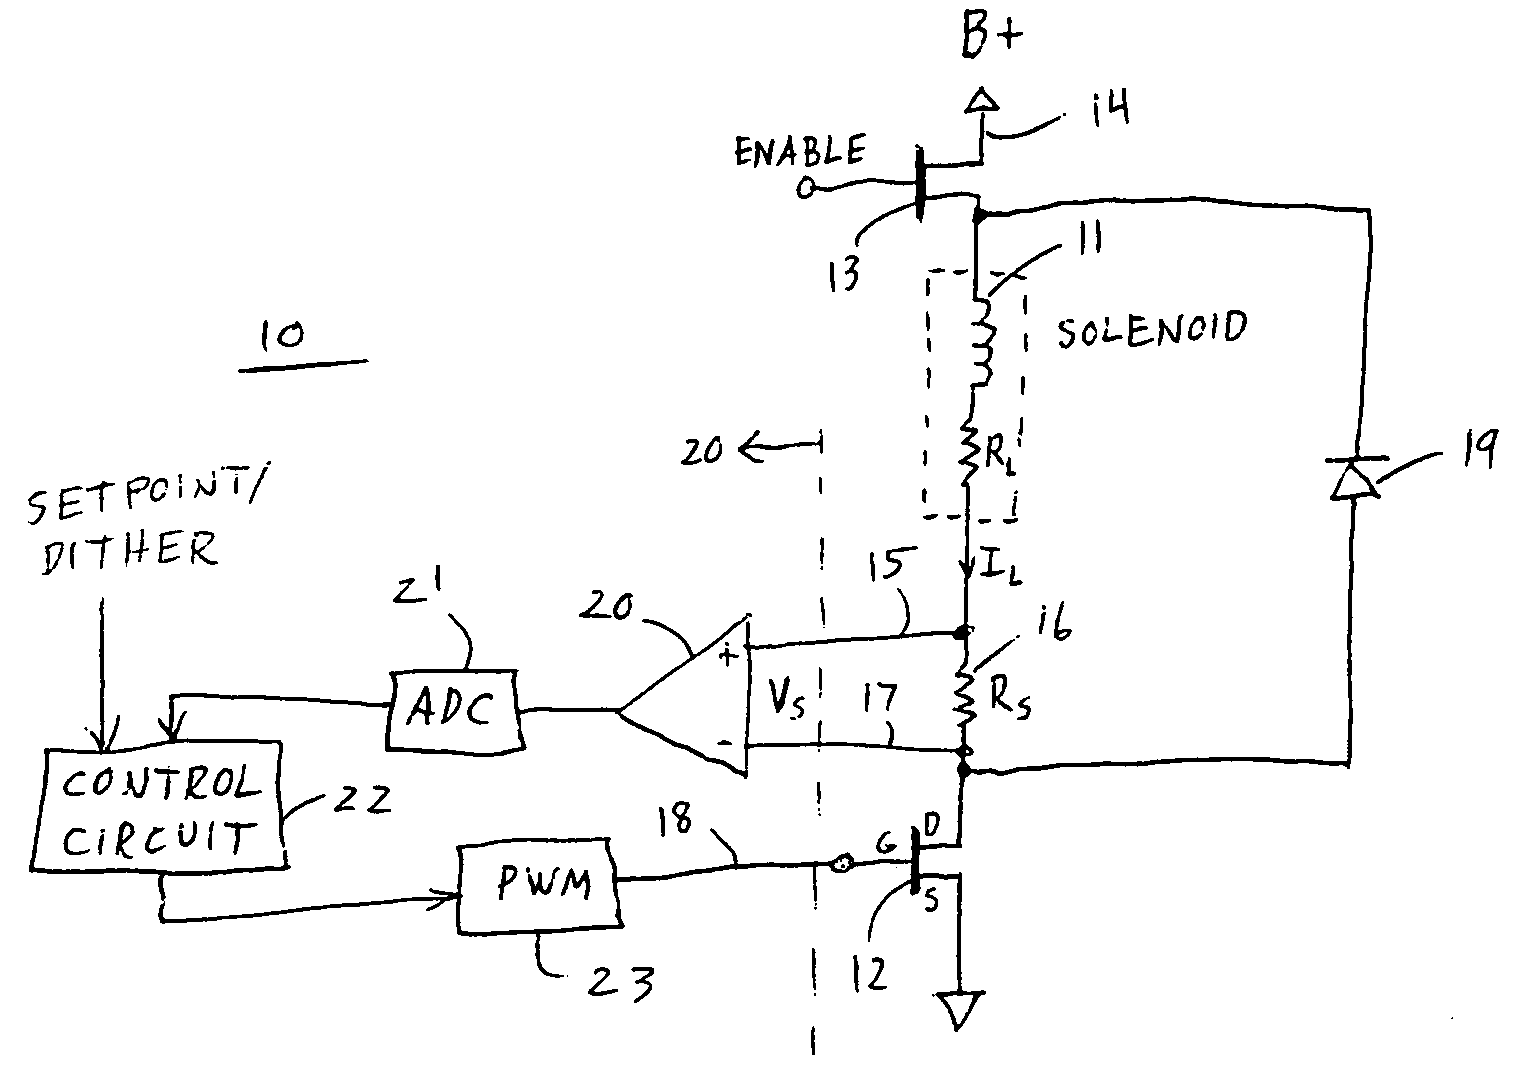 Frequency-controlled load driver for an electromechanical system